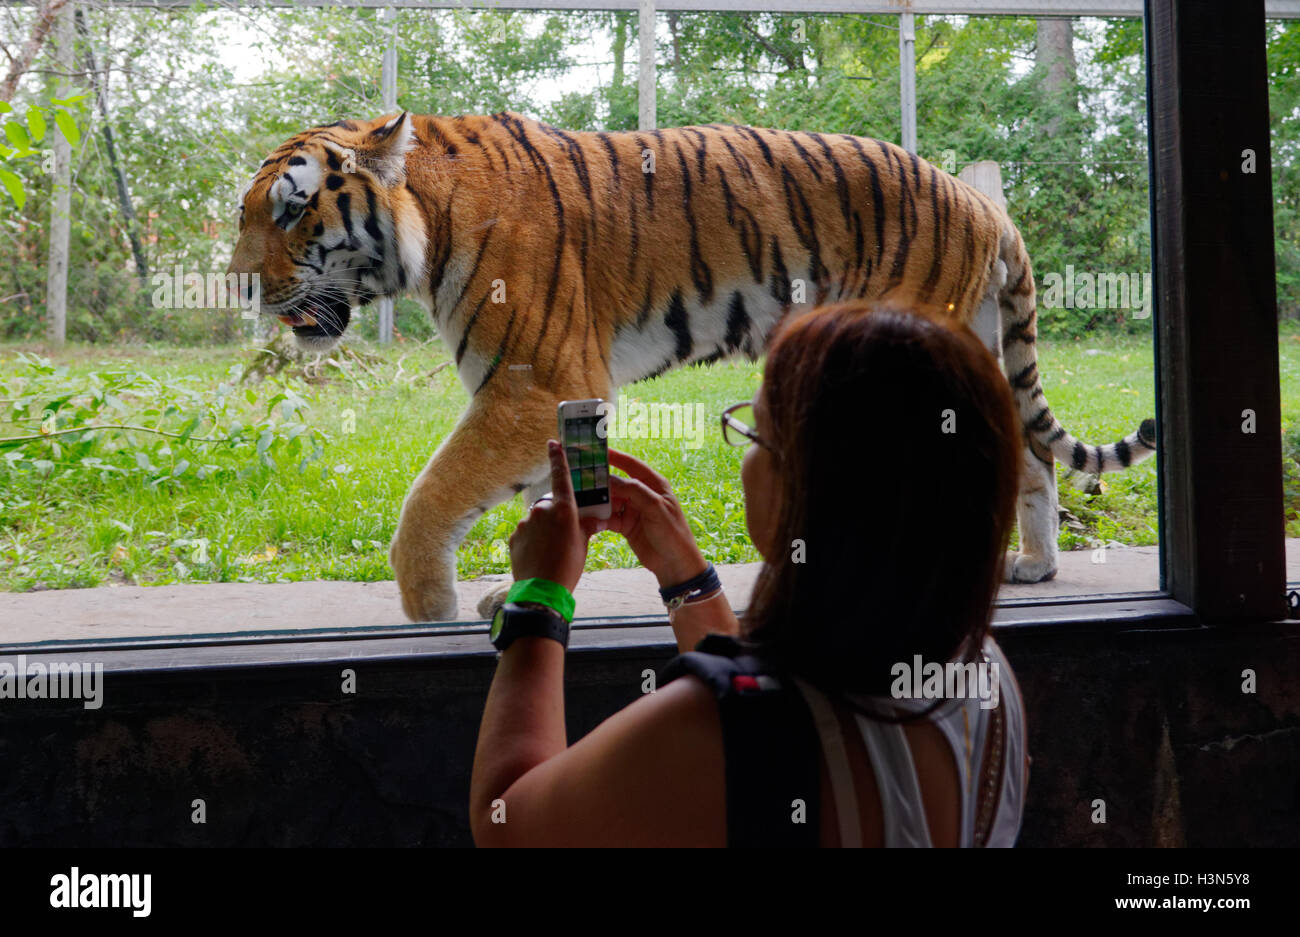 A woman taking a photo of the Siberian tiger with a cellphone in Granby Zoo, Quebec, Canada Stock Photo